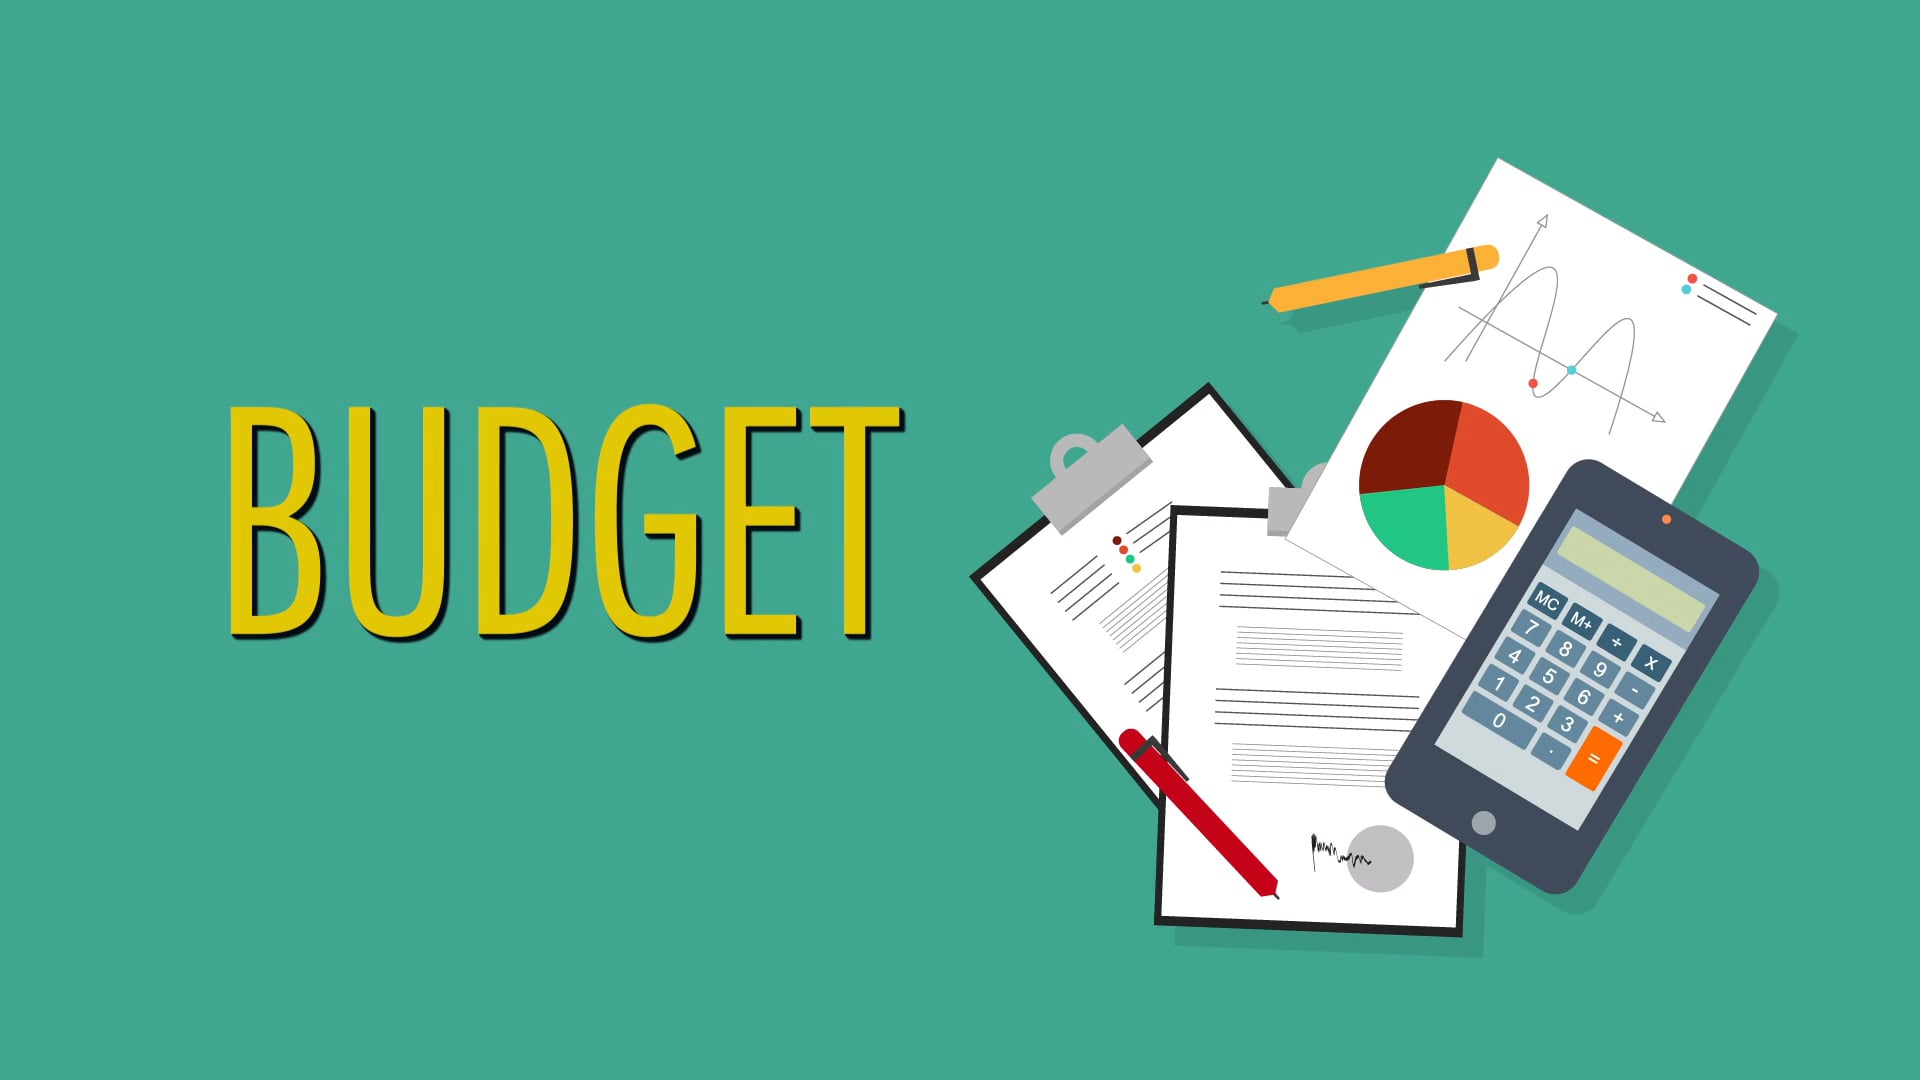 budget and money management